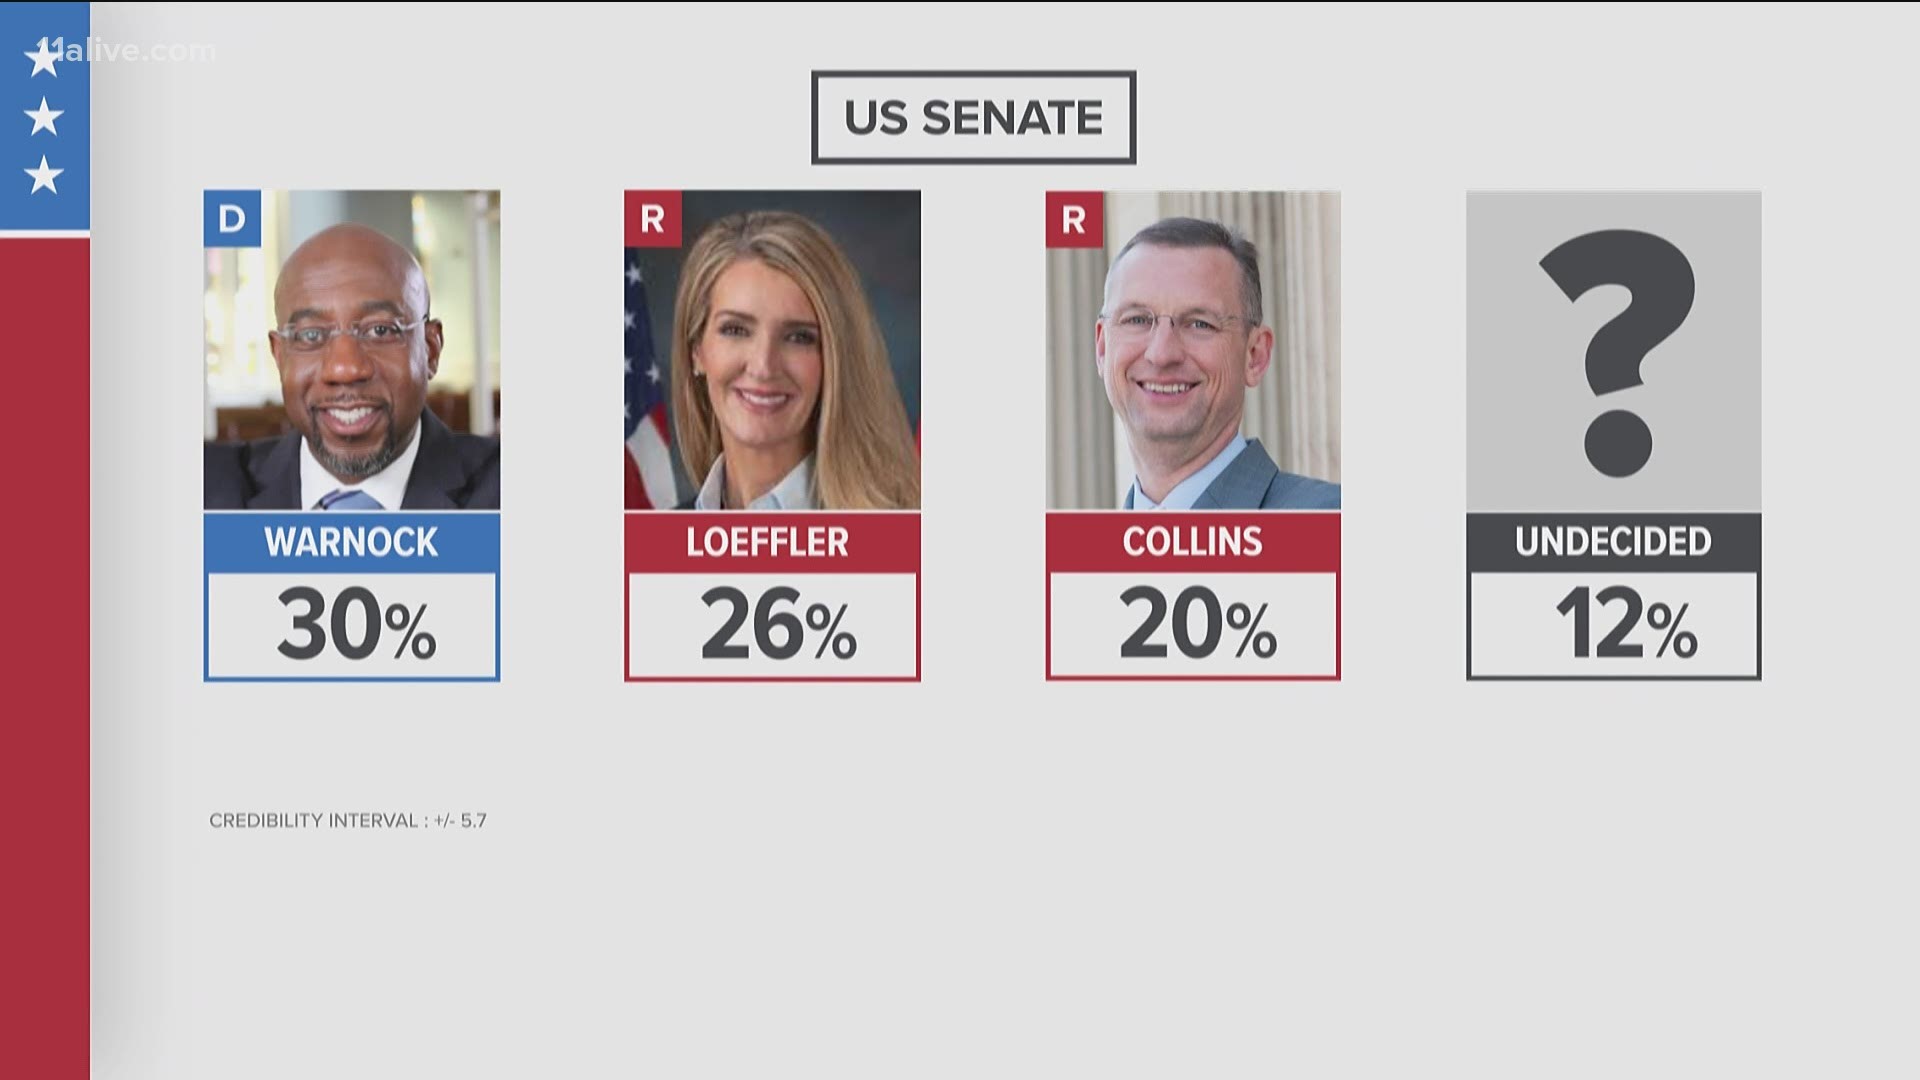 Most polls place Democrat Raphael Warnock in the lead in the special US Senate race, while two Republicans, Kelly Loeffler and Doug Collins battle for second.